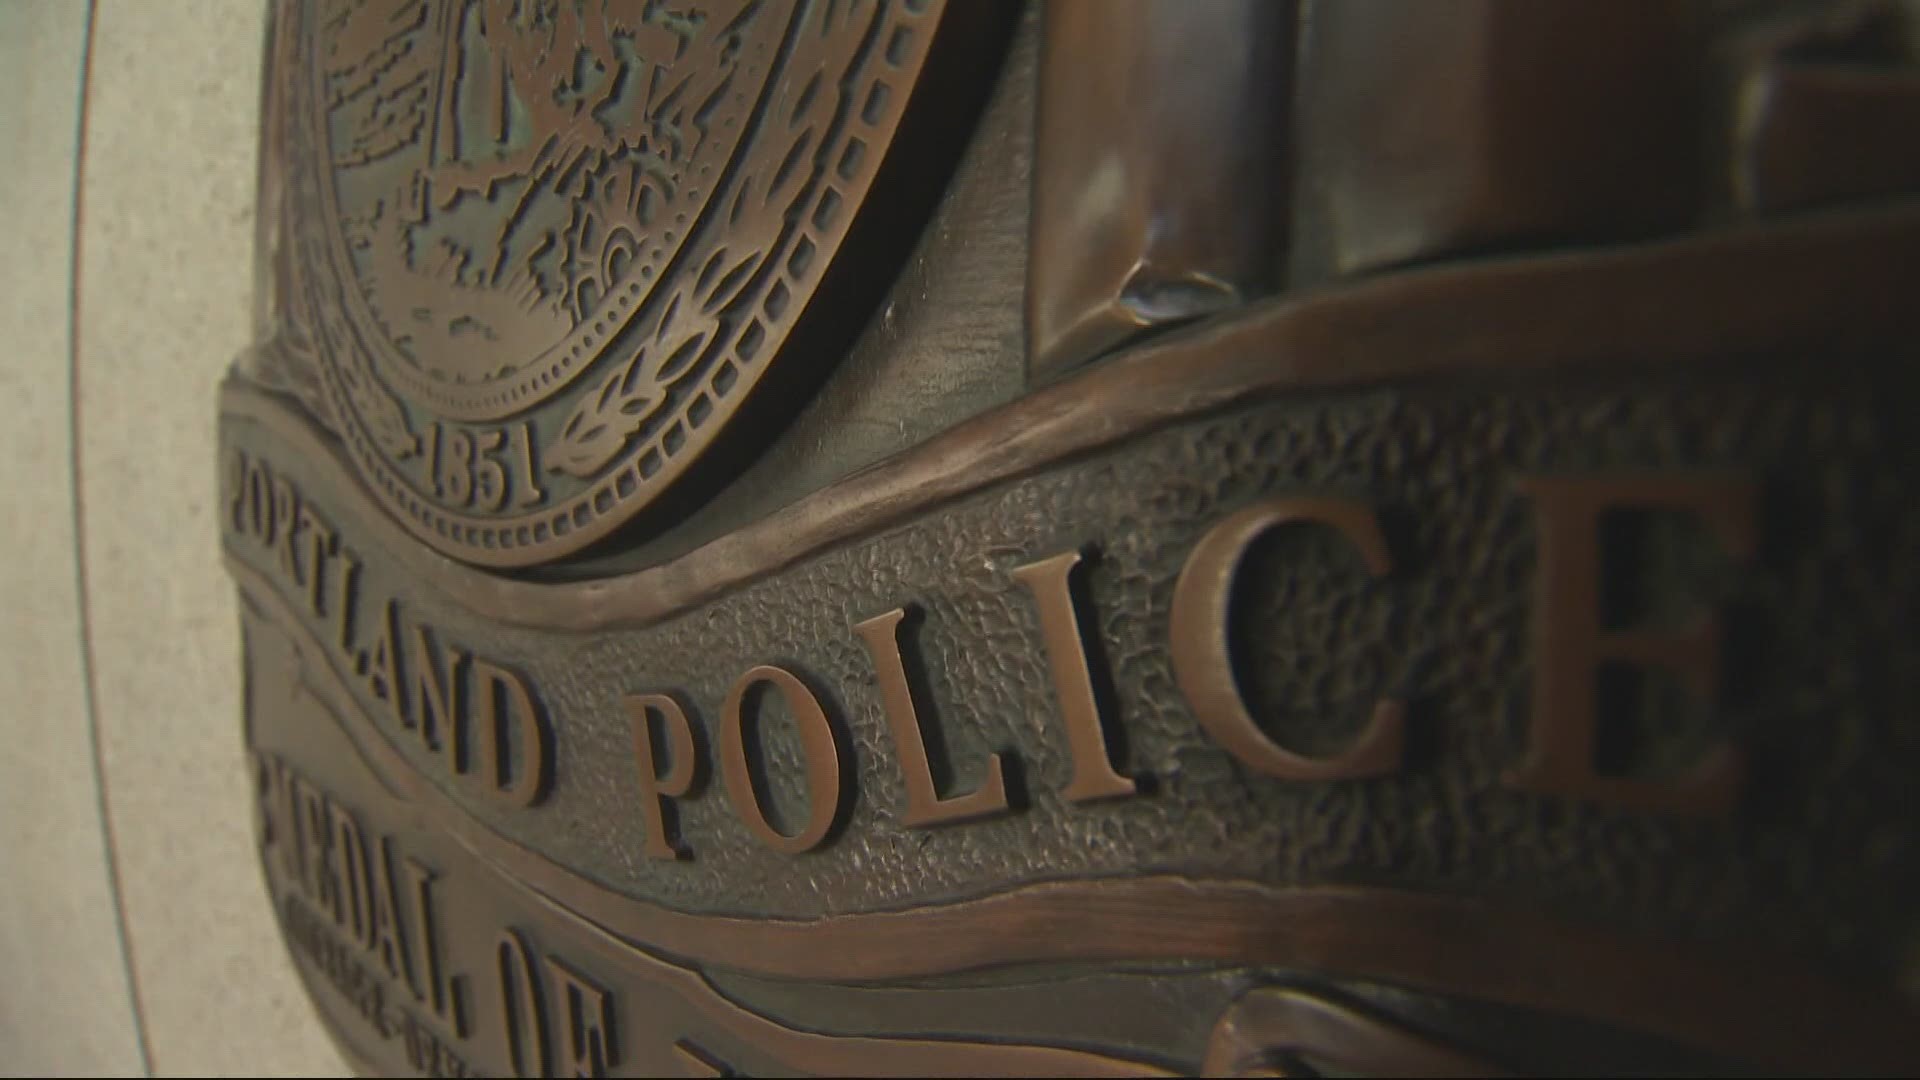 Since the initial settlement between the DOJ and Portland police was reached in 2012, at least 23 people with mental illnesses have been killed by Portland police.